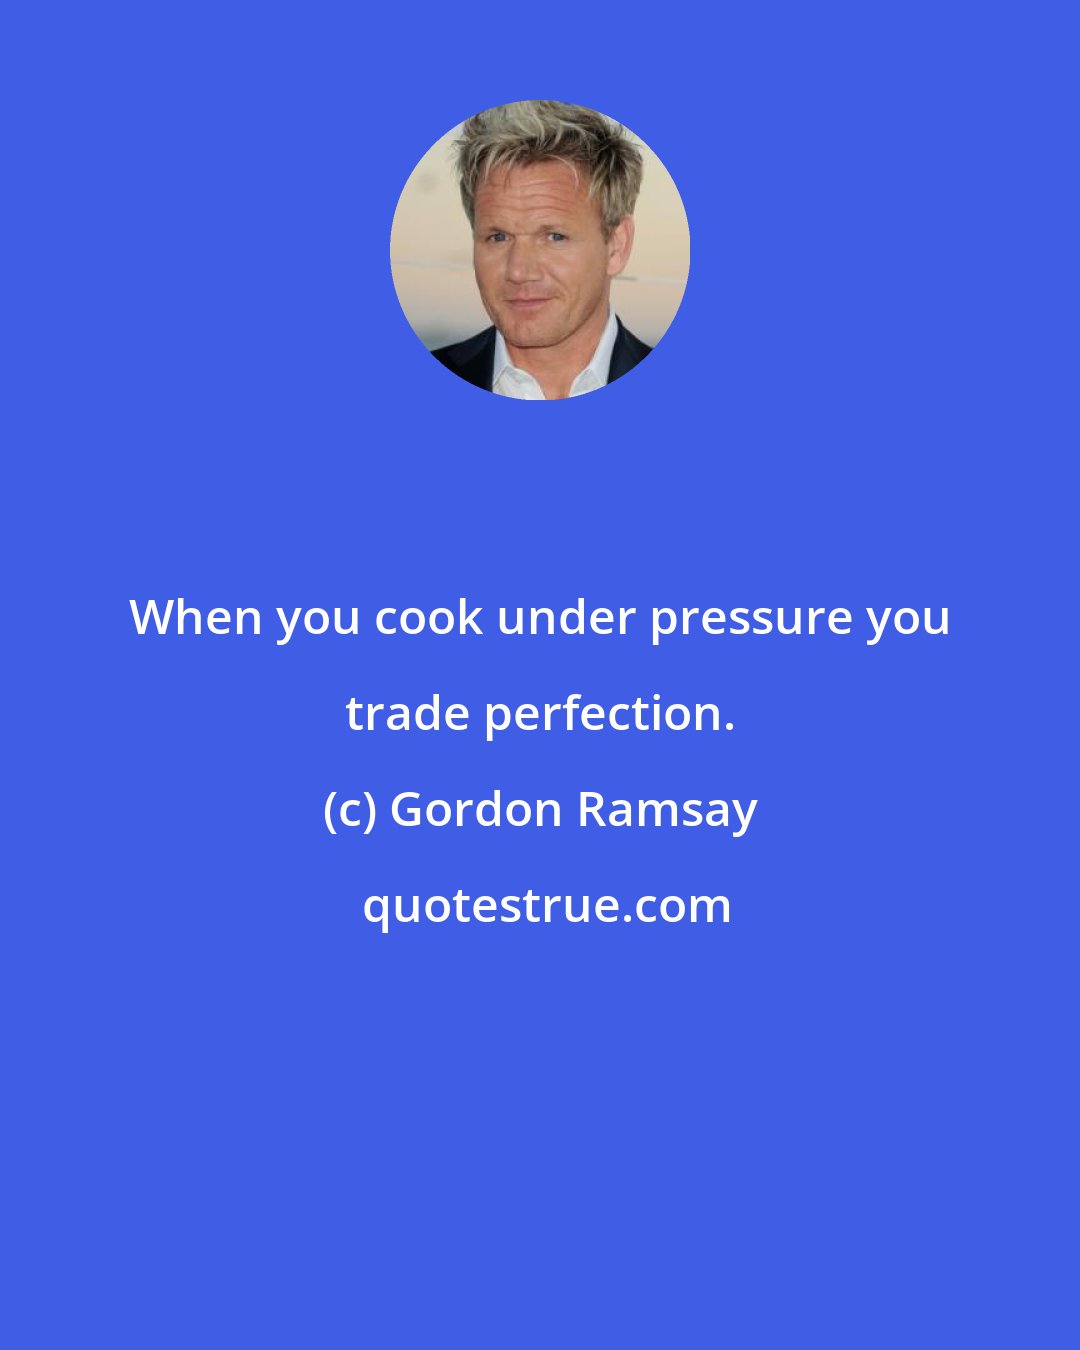 Gordon Ramsay: When you cook under pressure you trade perfection.